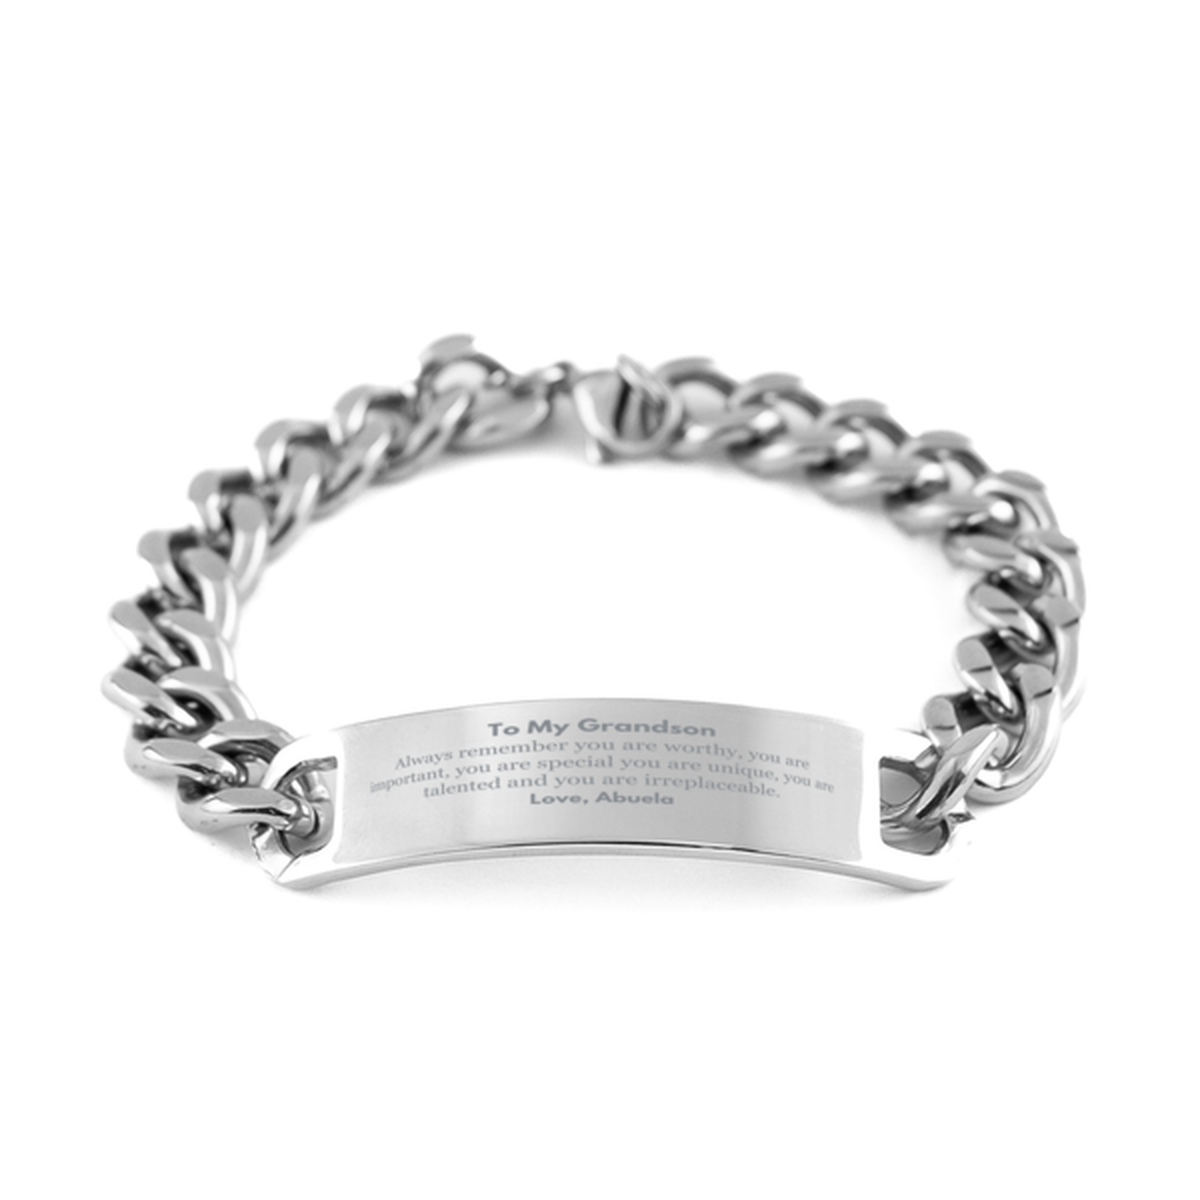 Grandson Birthday Gifts from Abuela, Inspirational Cuban Chain Stainless Steel Bracelet for Grandson Christmas Graduation Gifts for Grandson Always remember you are worthy, you are important. Love, Abuela